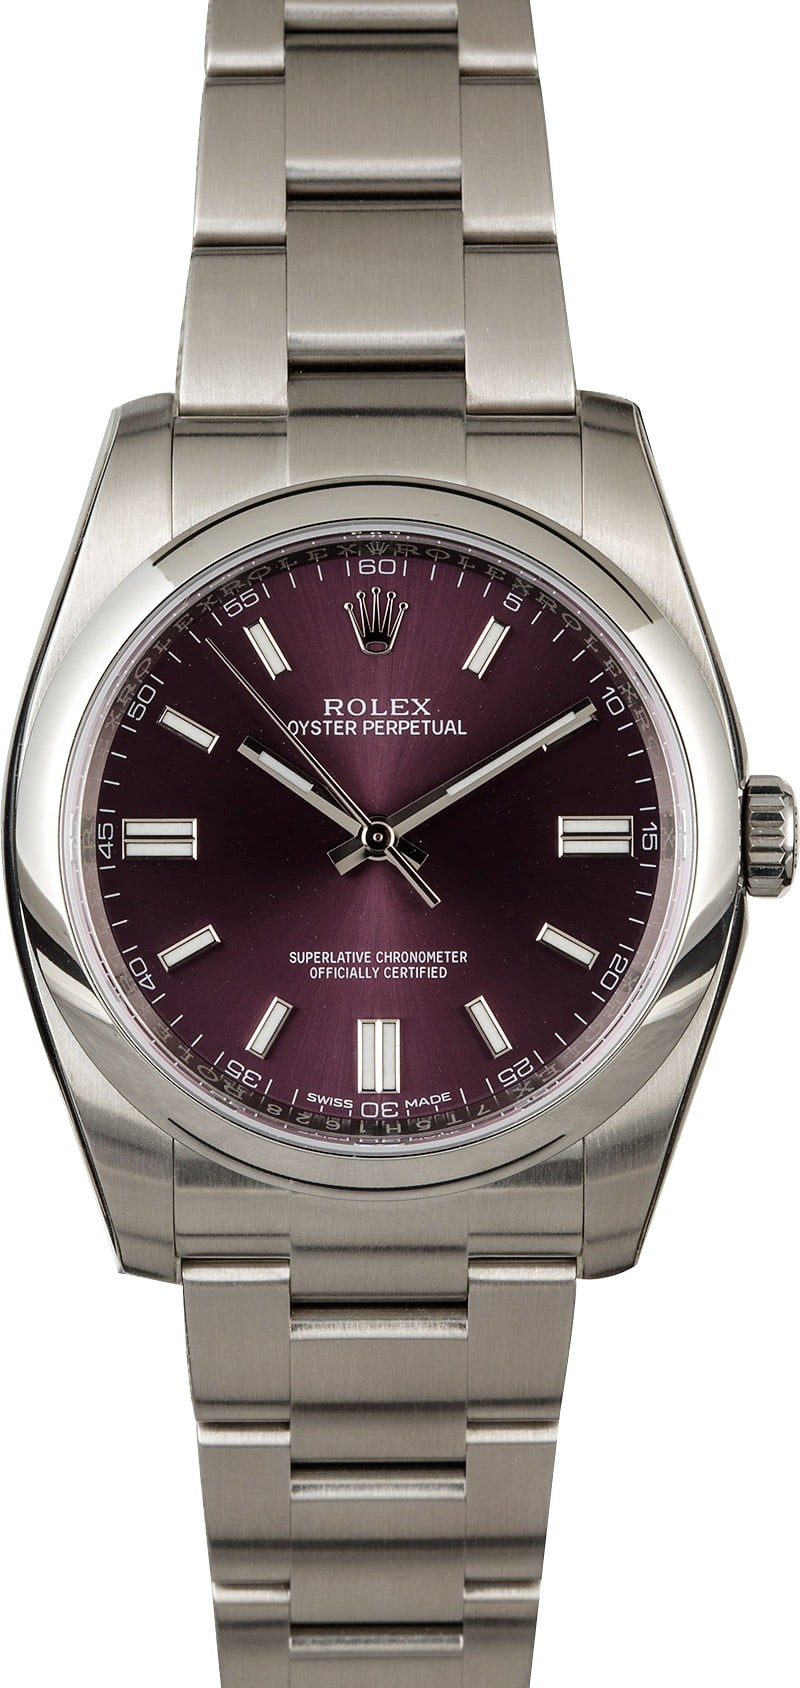 Imitation Rolex Oyster Perpetual 116000 Red Grape Dial WE00537